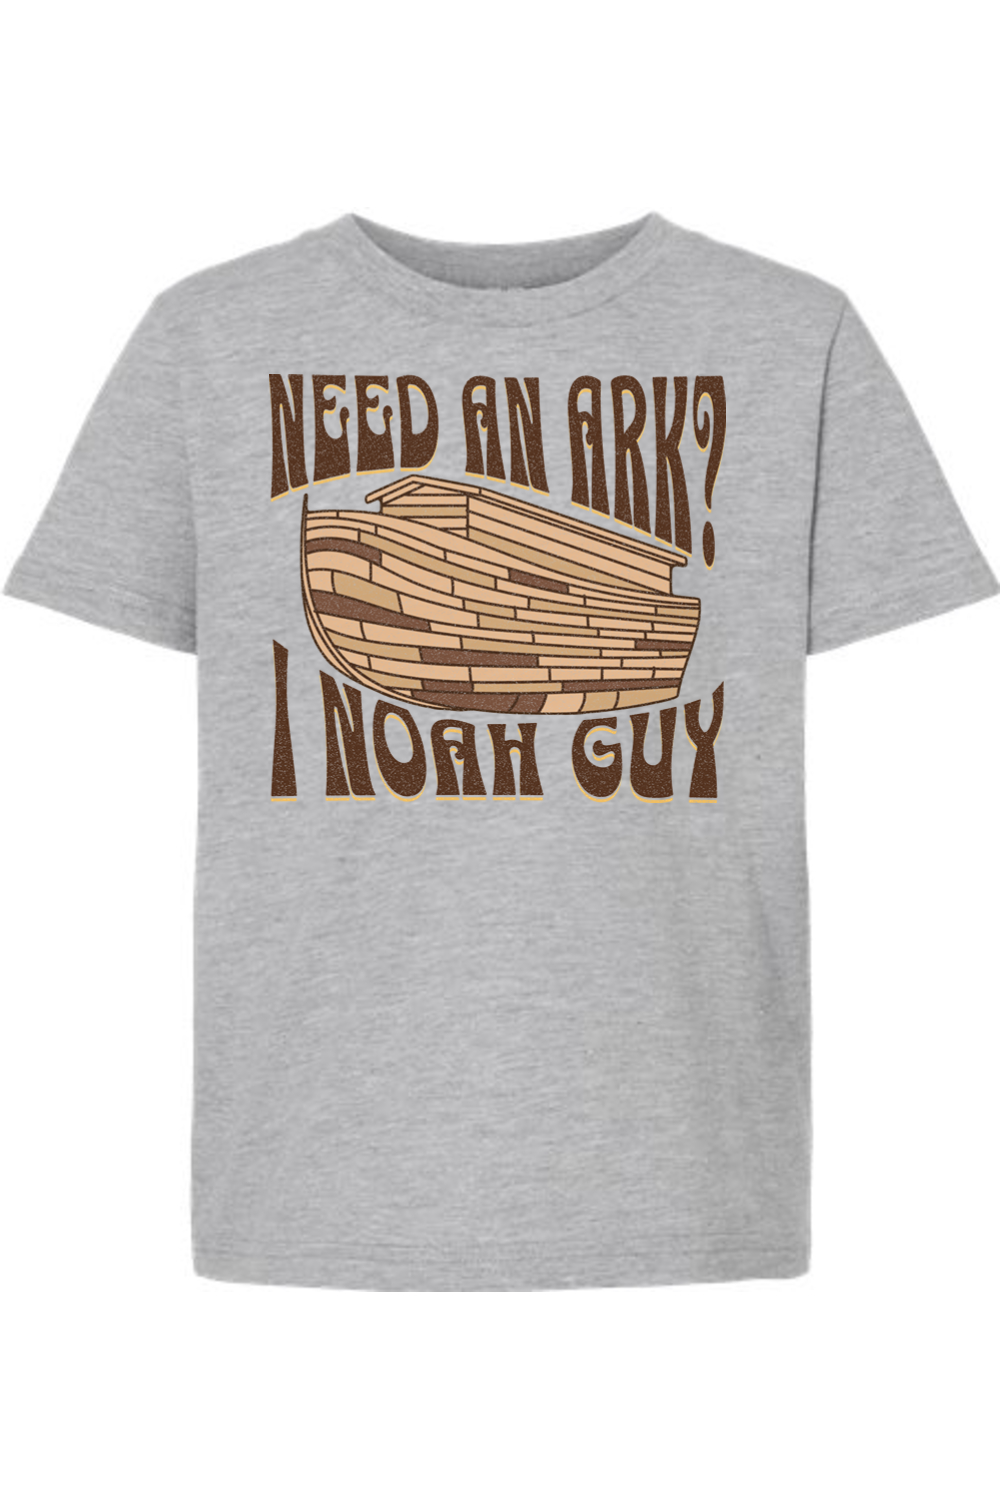 Need an Ark? I Know a Guy - Kids T-Shirt